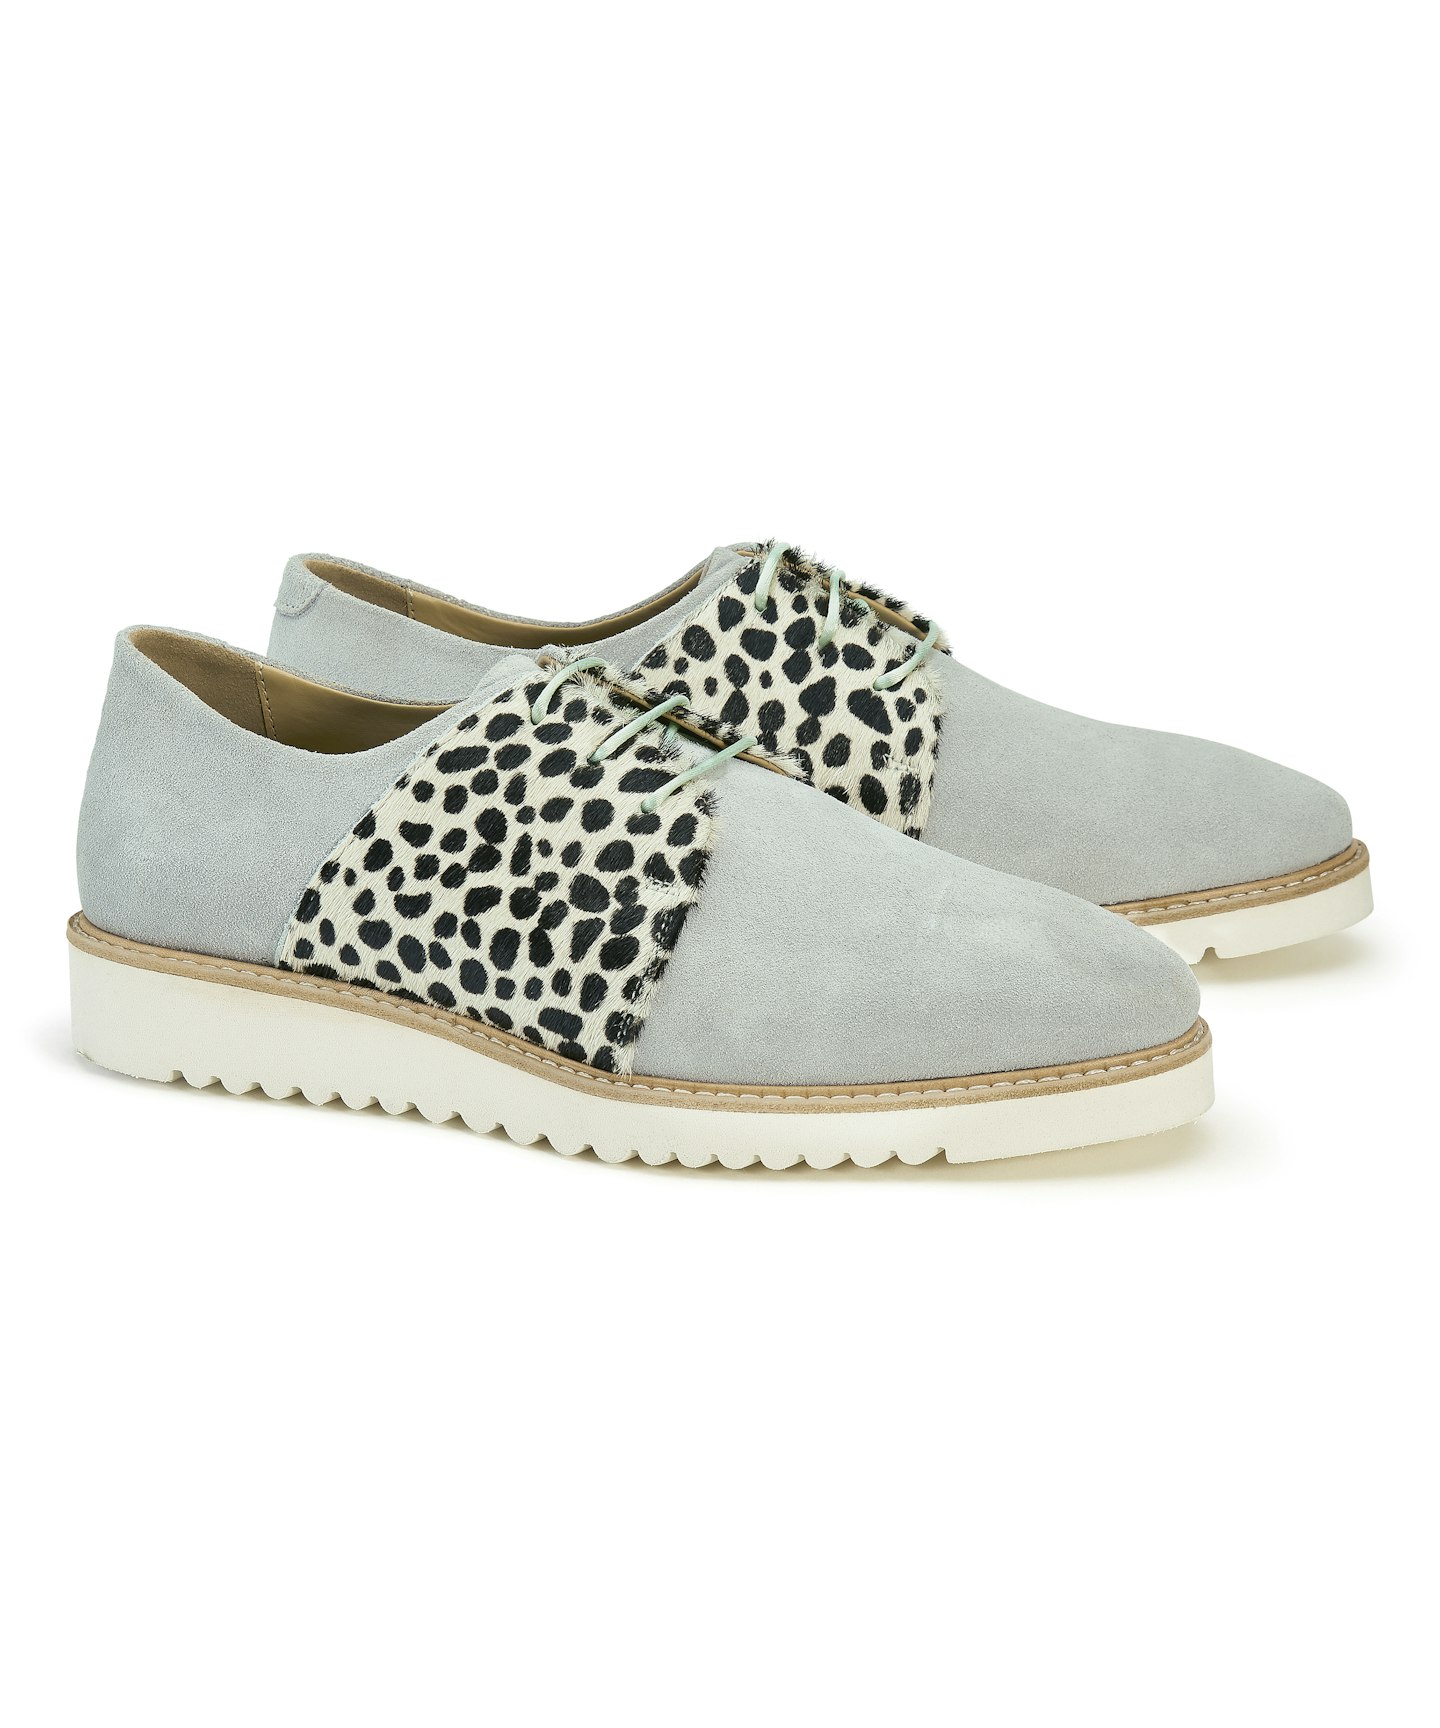 Suede Brogues With Animal Print, £169